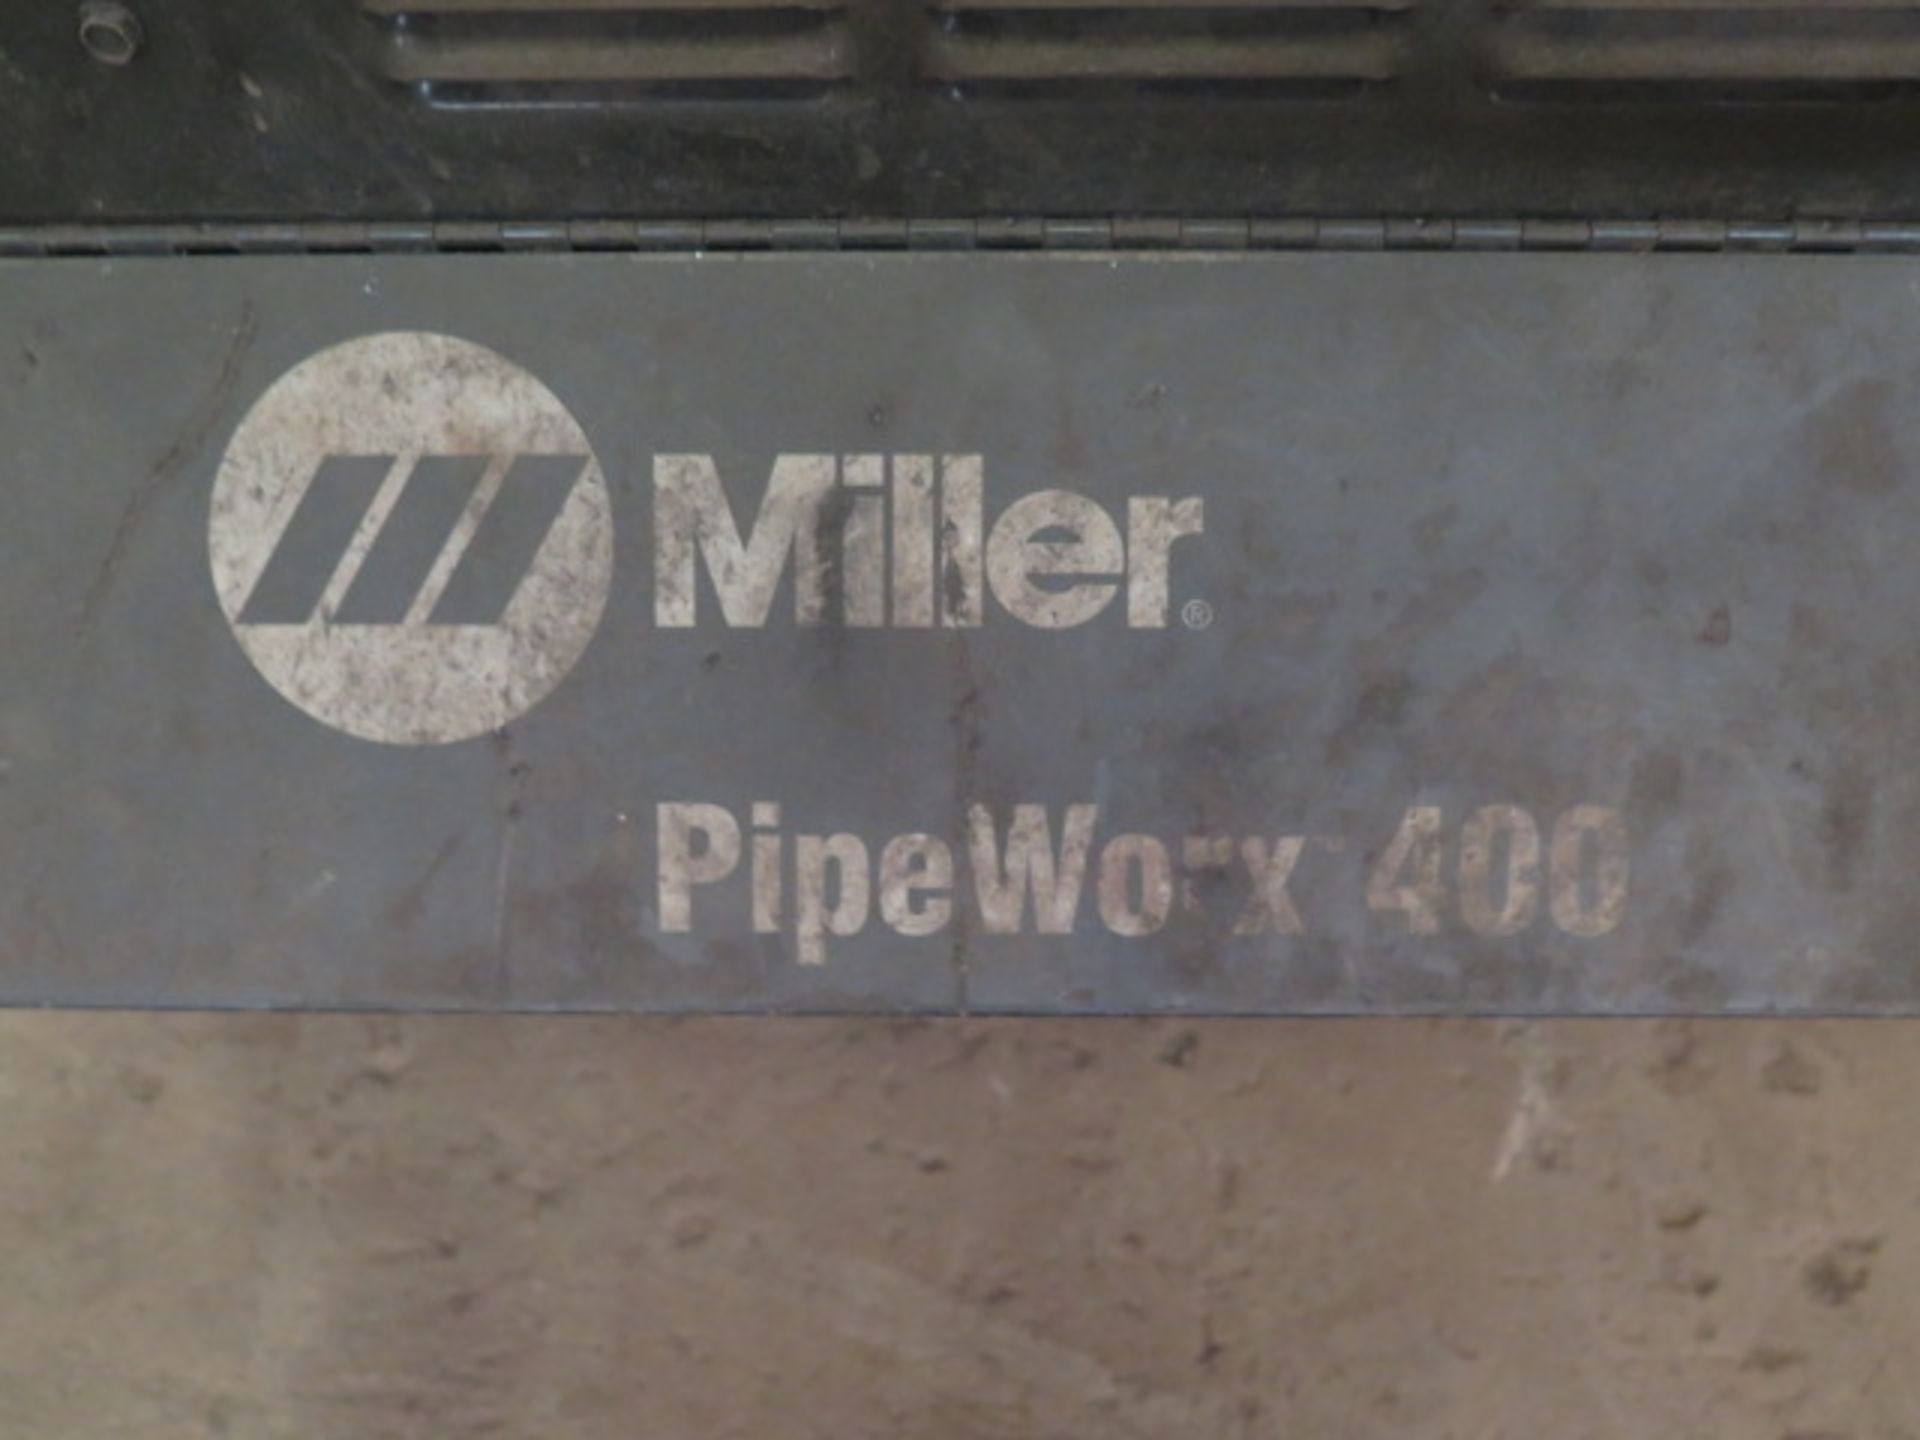 Miller “Pipe Worx 400” MIG-TIG-Stick Welding Power Source s/n MB020280G w/ Miller Dual Source Wire - Image 7 of 7